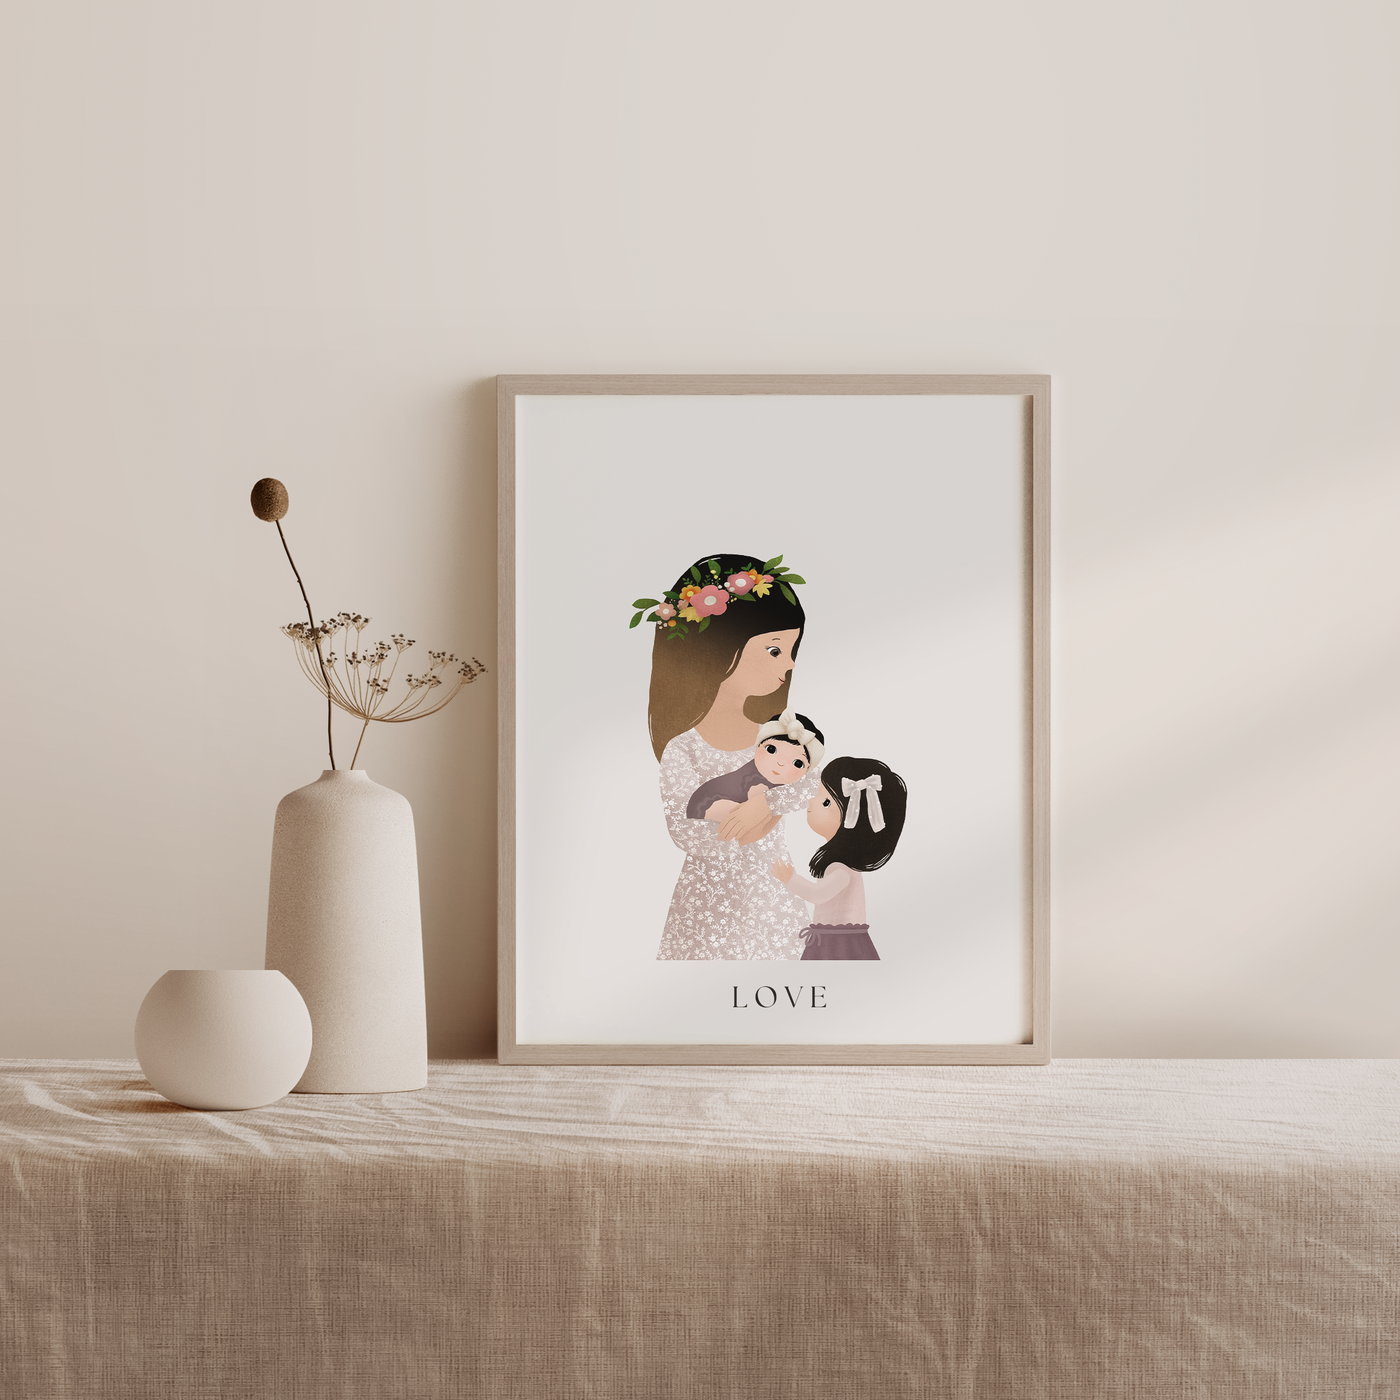 Mama + Littles Poster | Personalized Mother's Day Portrait (Frame Included)